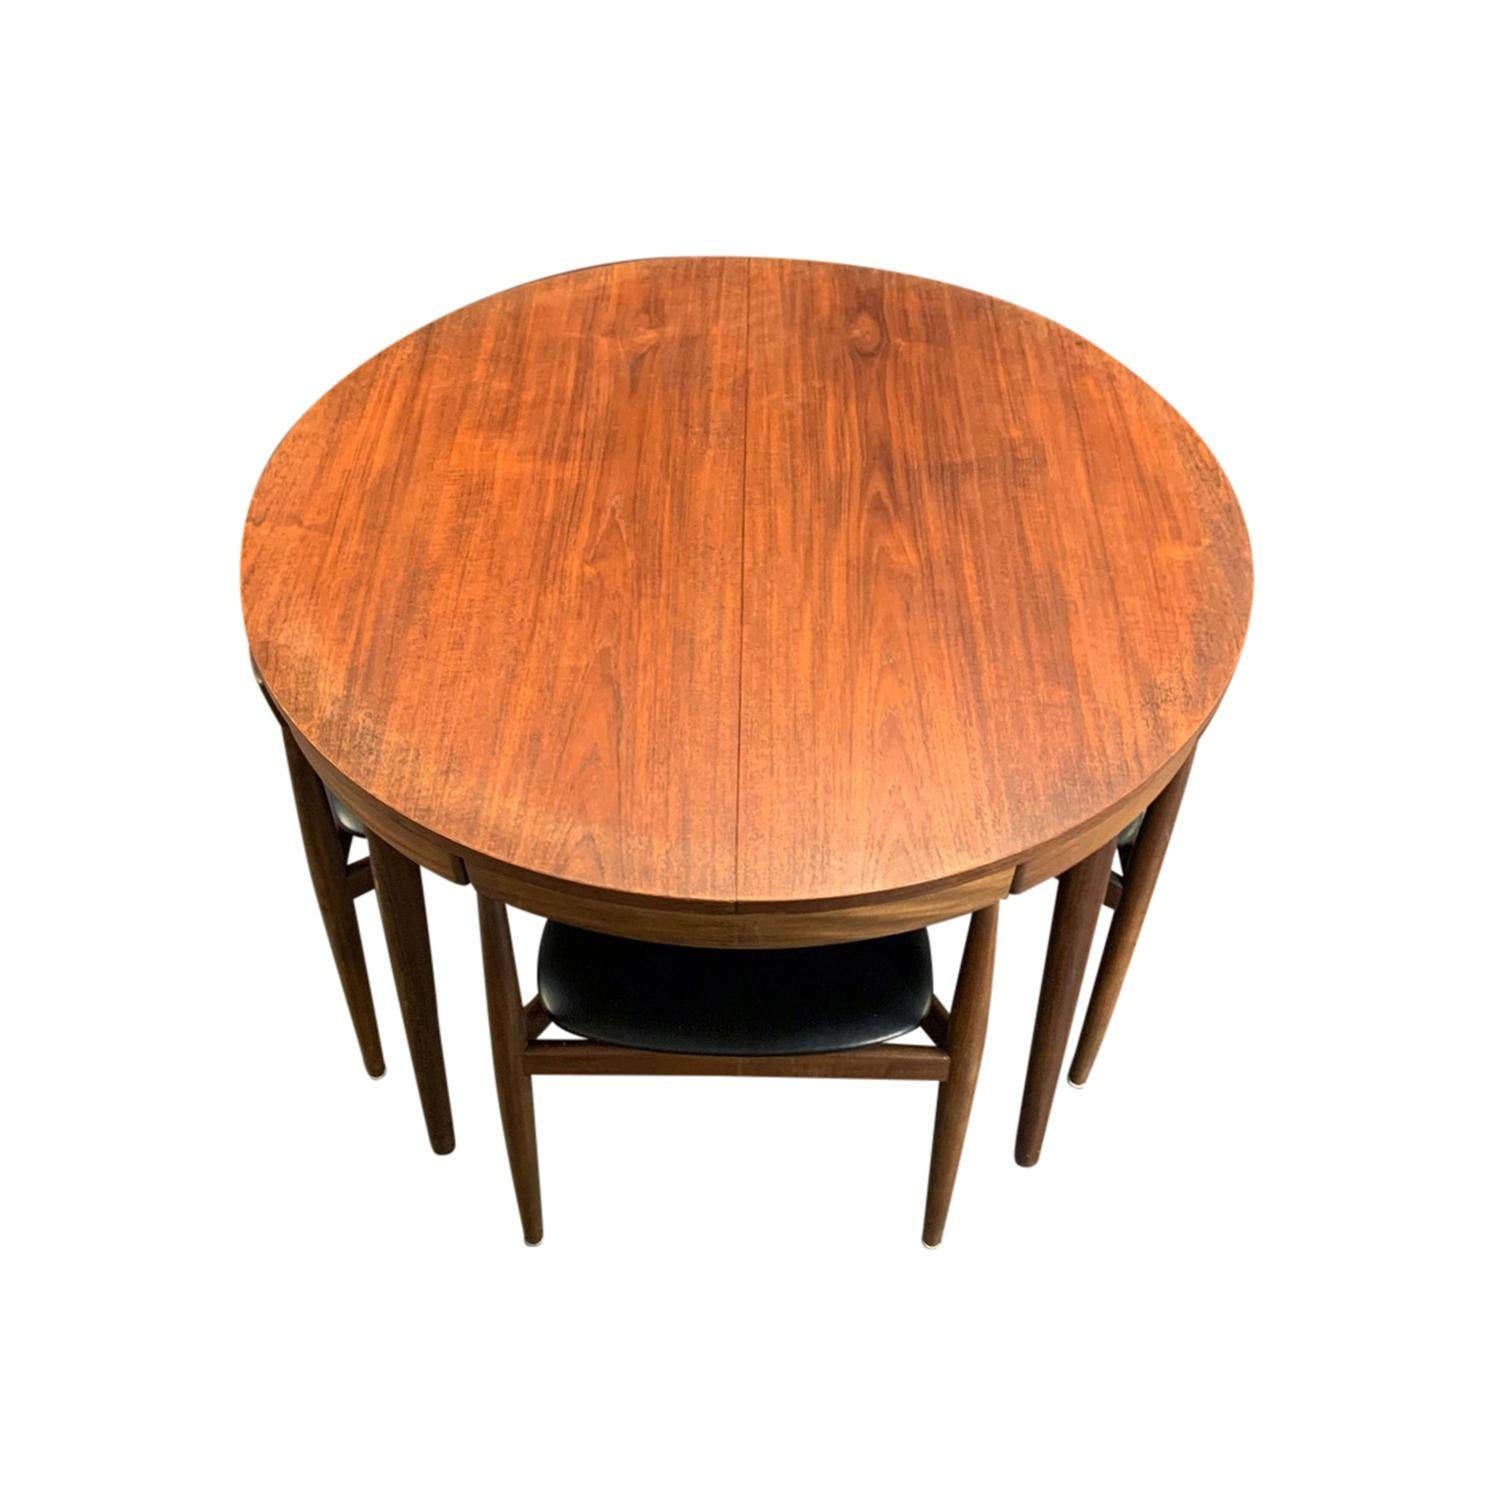 A vintage Mid-Century Modern Danish roundette dining table made of hand carved teakwood, designed by Hans Olsen and produced by Frem Røjle, in good condition. The round, Scandinavian dining table is extendable, composed with four chairs which fully